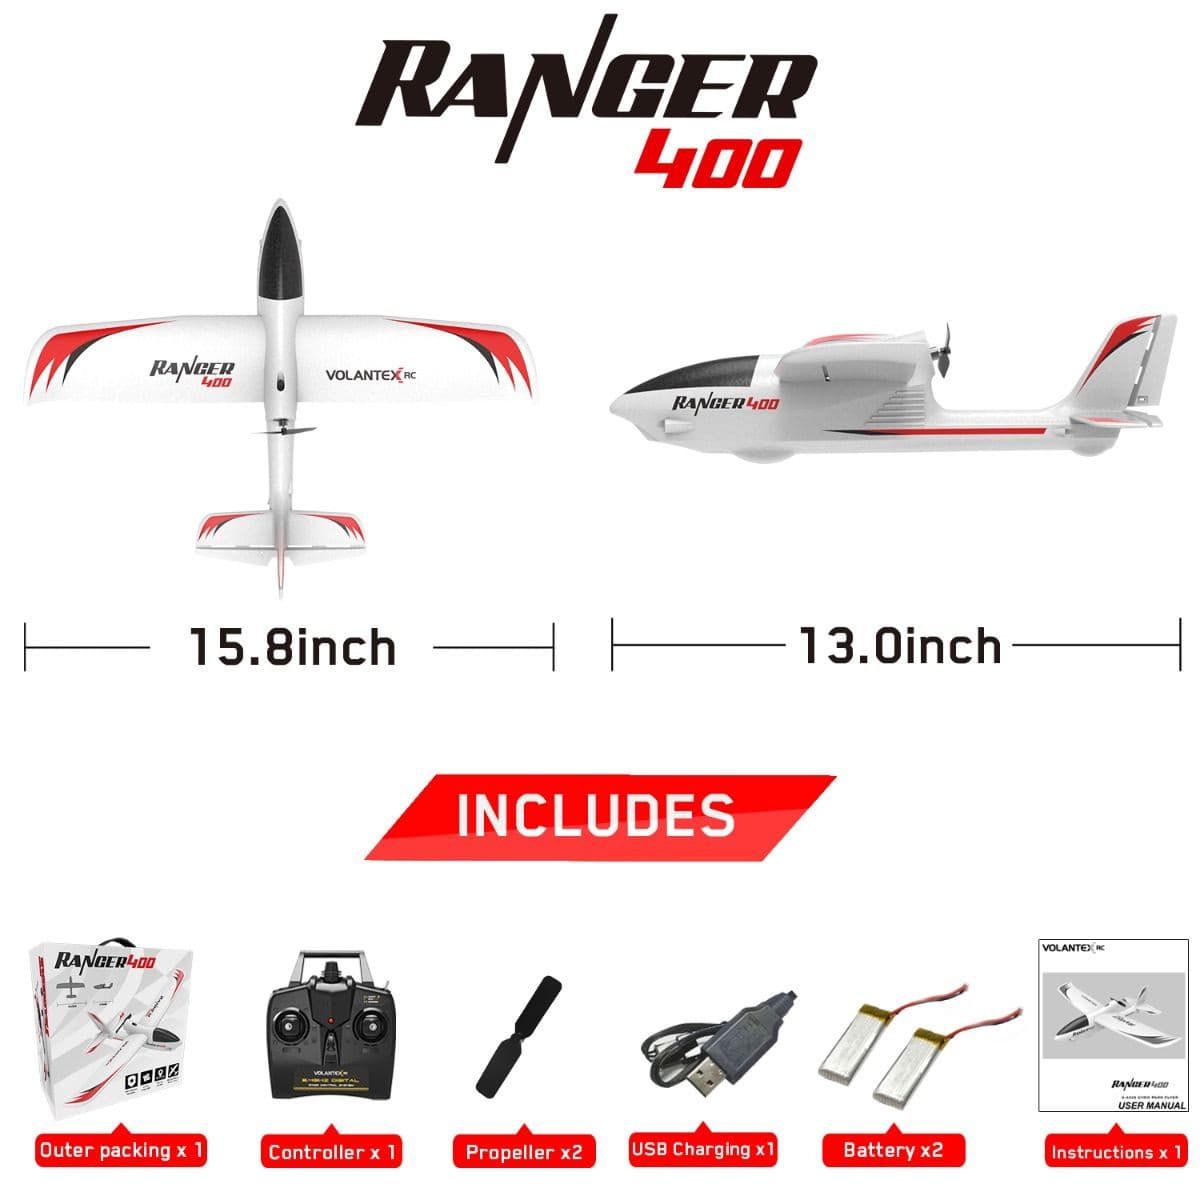 VOLANTEXRC Ranger 400 RC Trainer Airplane with Xpilot 6-AXIS Gyro System easy to fly for beginners park flyer rc glider (761-6) RTF - EXHOBBY